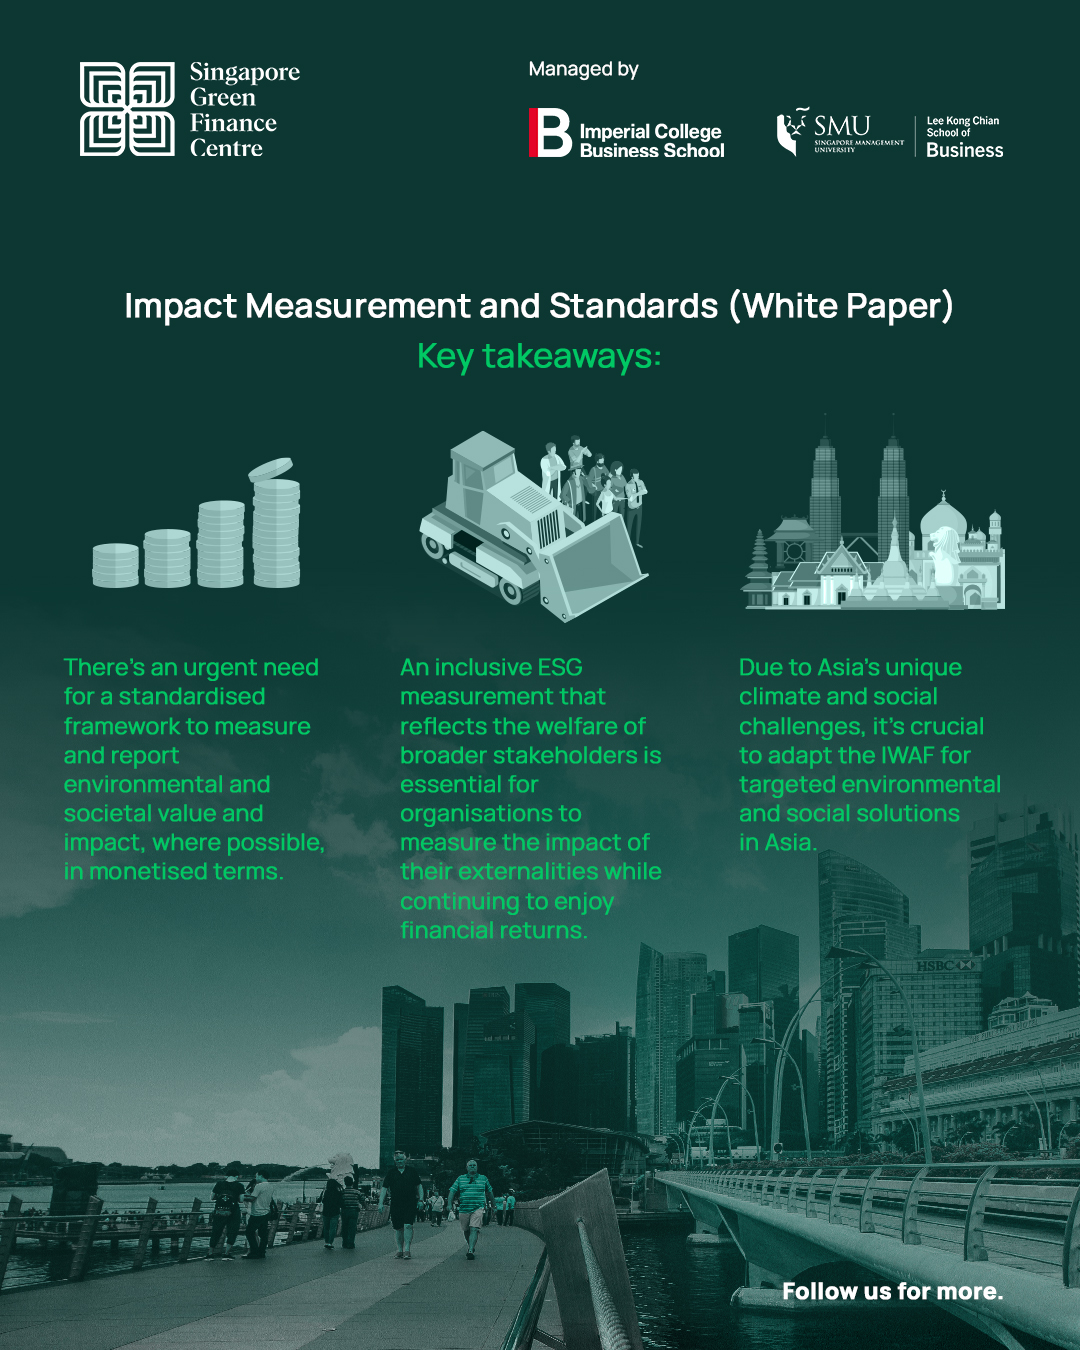 Impact Measurement and Standards White Paper Key Points